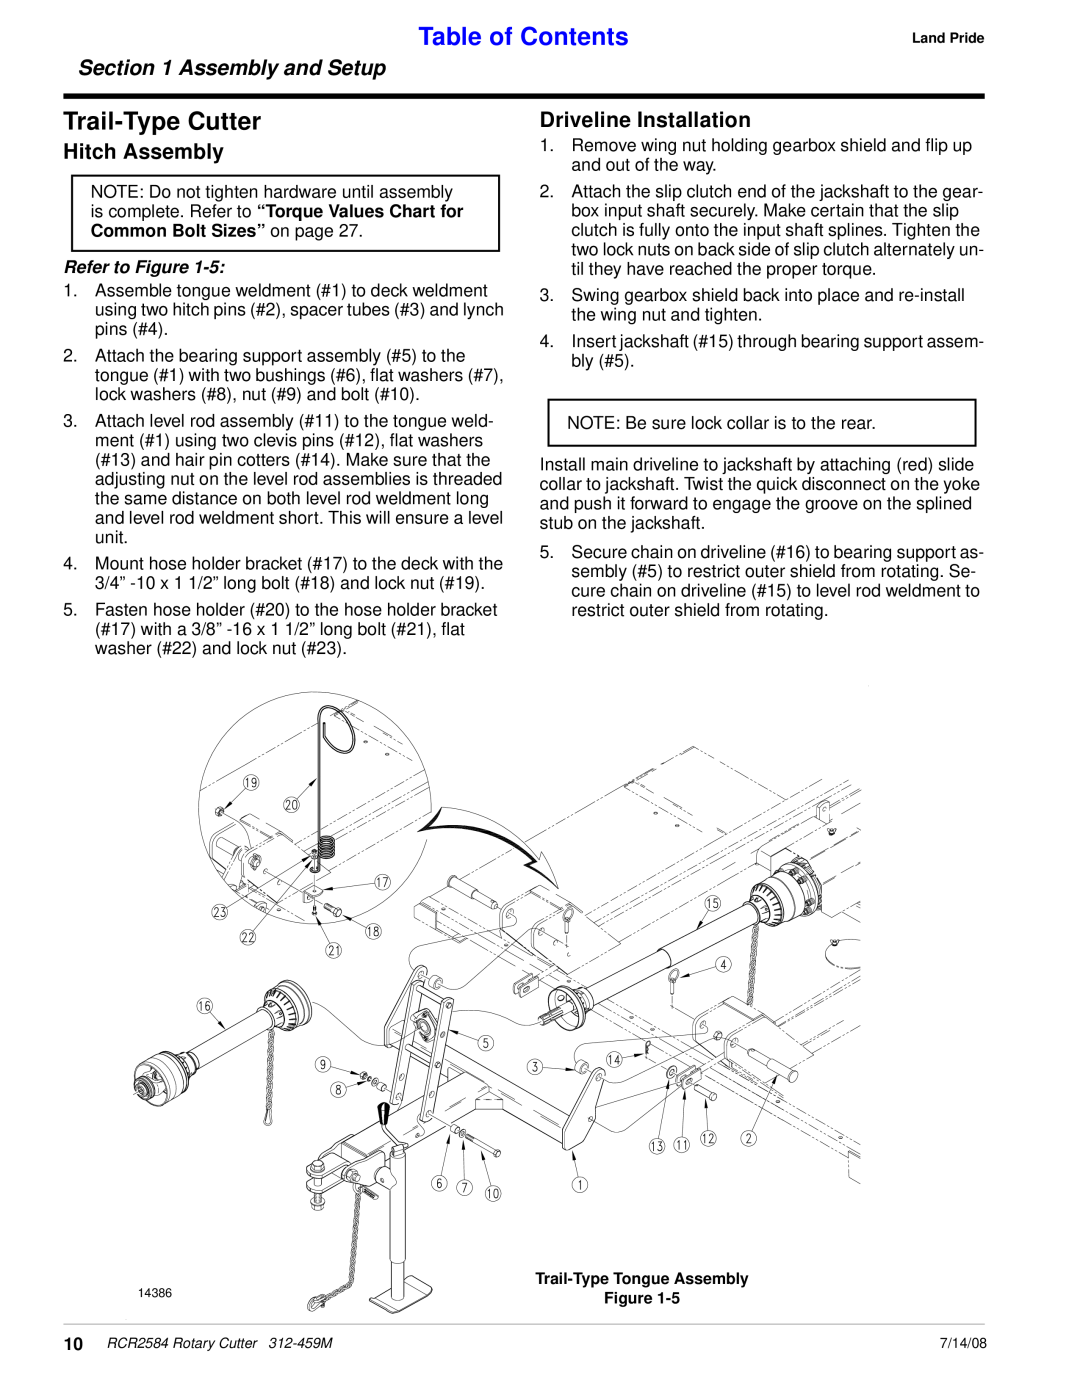 Land Pride RCR2584 manual Trail-Type Cutter, Hitch Assembly, Table of Contents, Assembly and Setup, Driveline Installation 